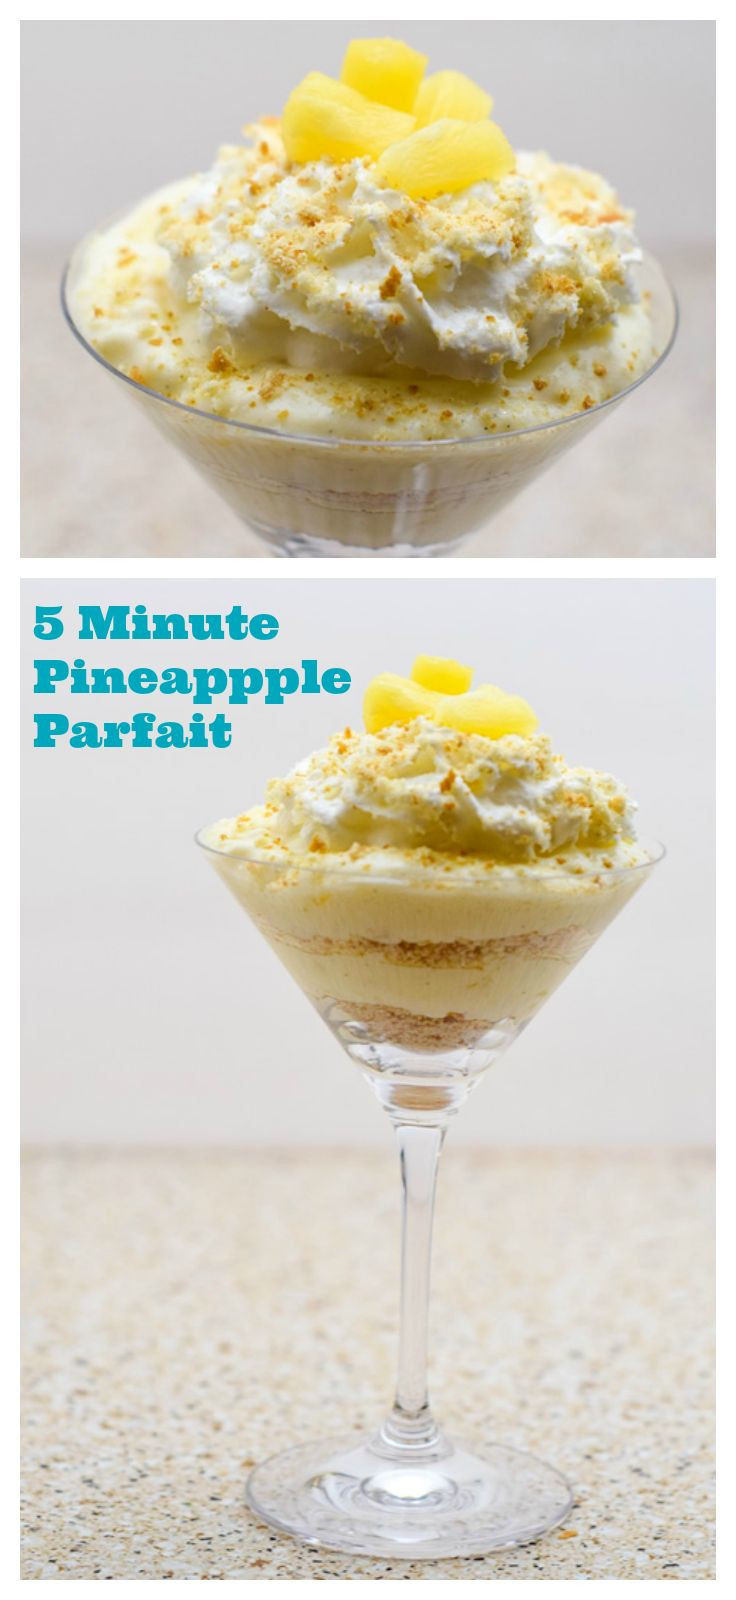 Pineapple Desserts Healthy
 Quick and Easy Dessert 5 Minute Pineapple Parfait Plus